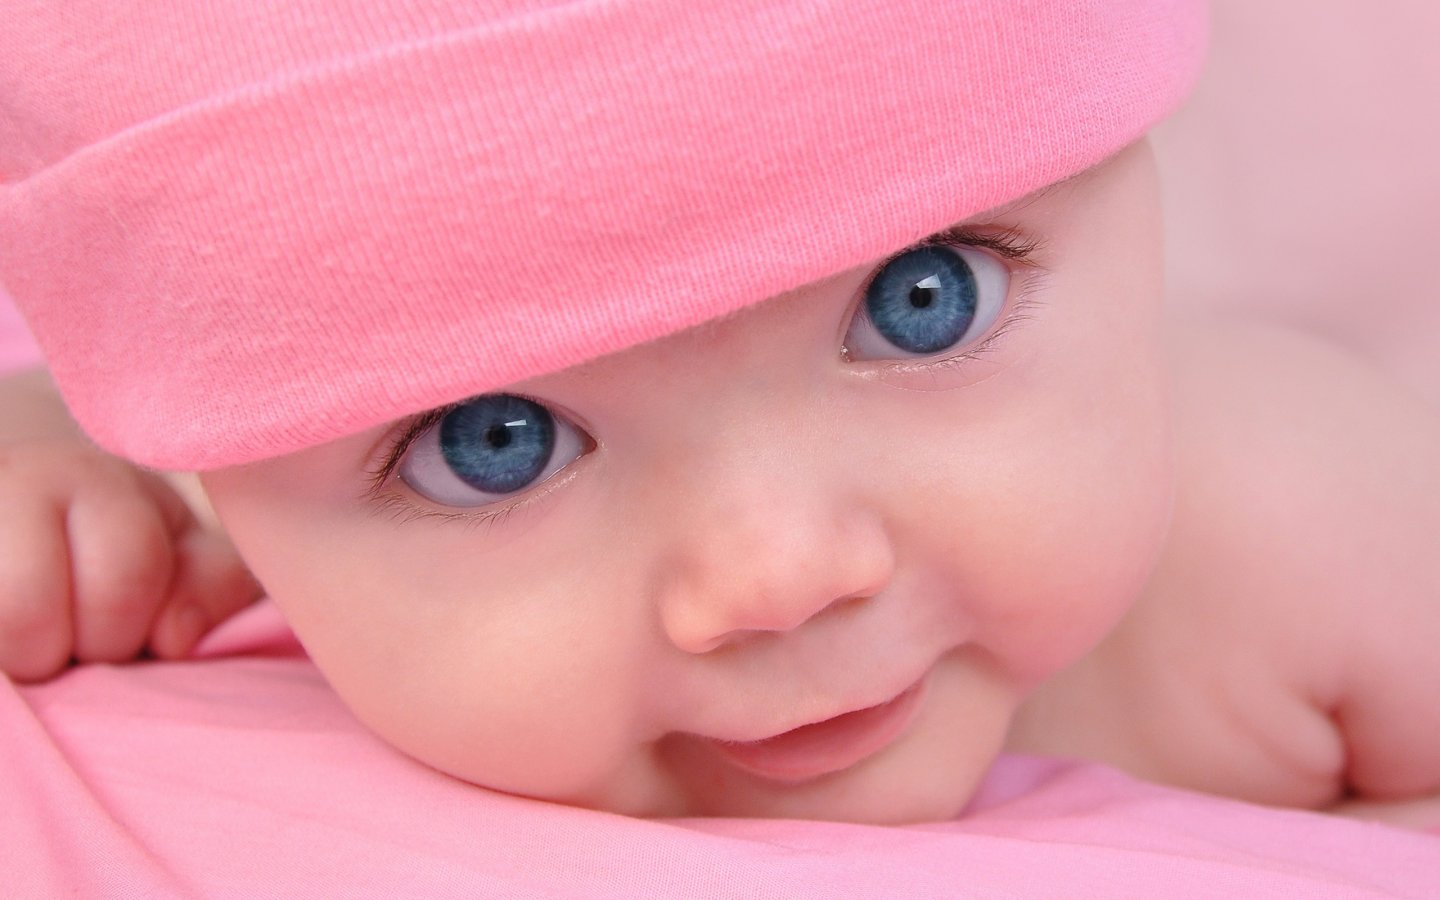 Pic Funny Pictures Blue eyes cute baby picture cute baby image